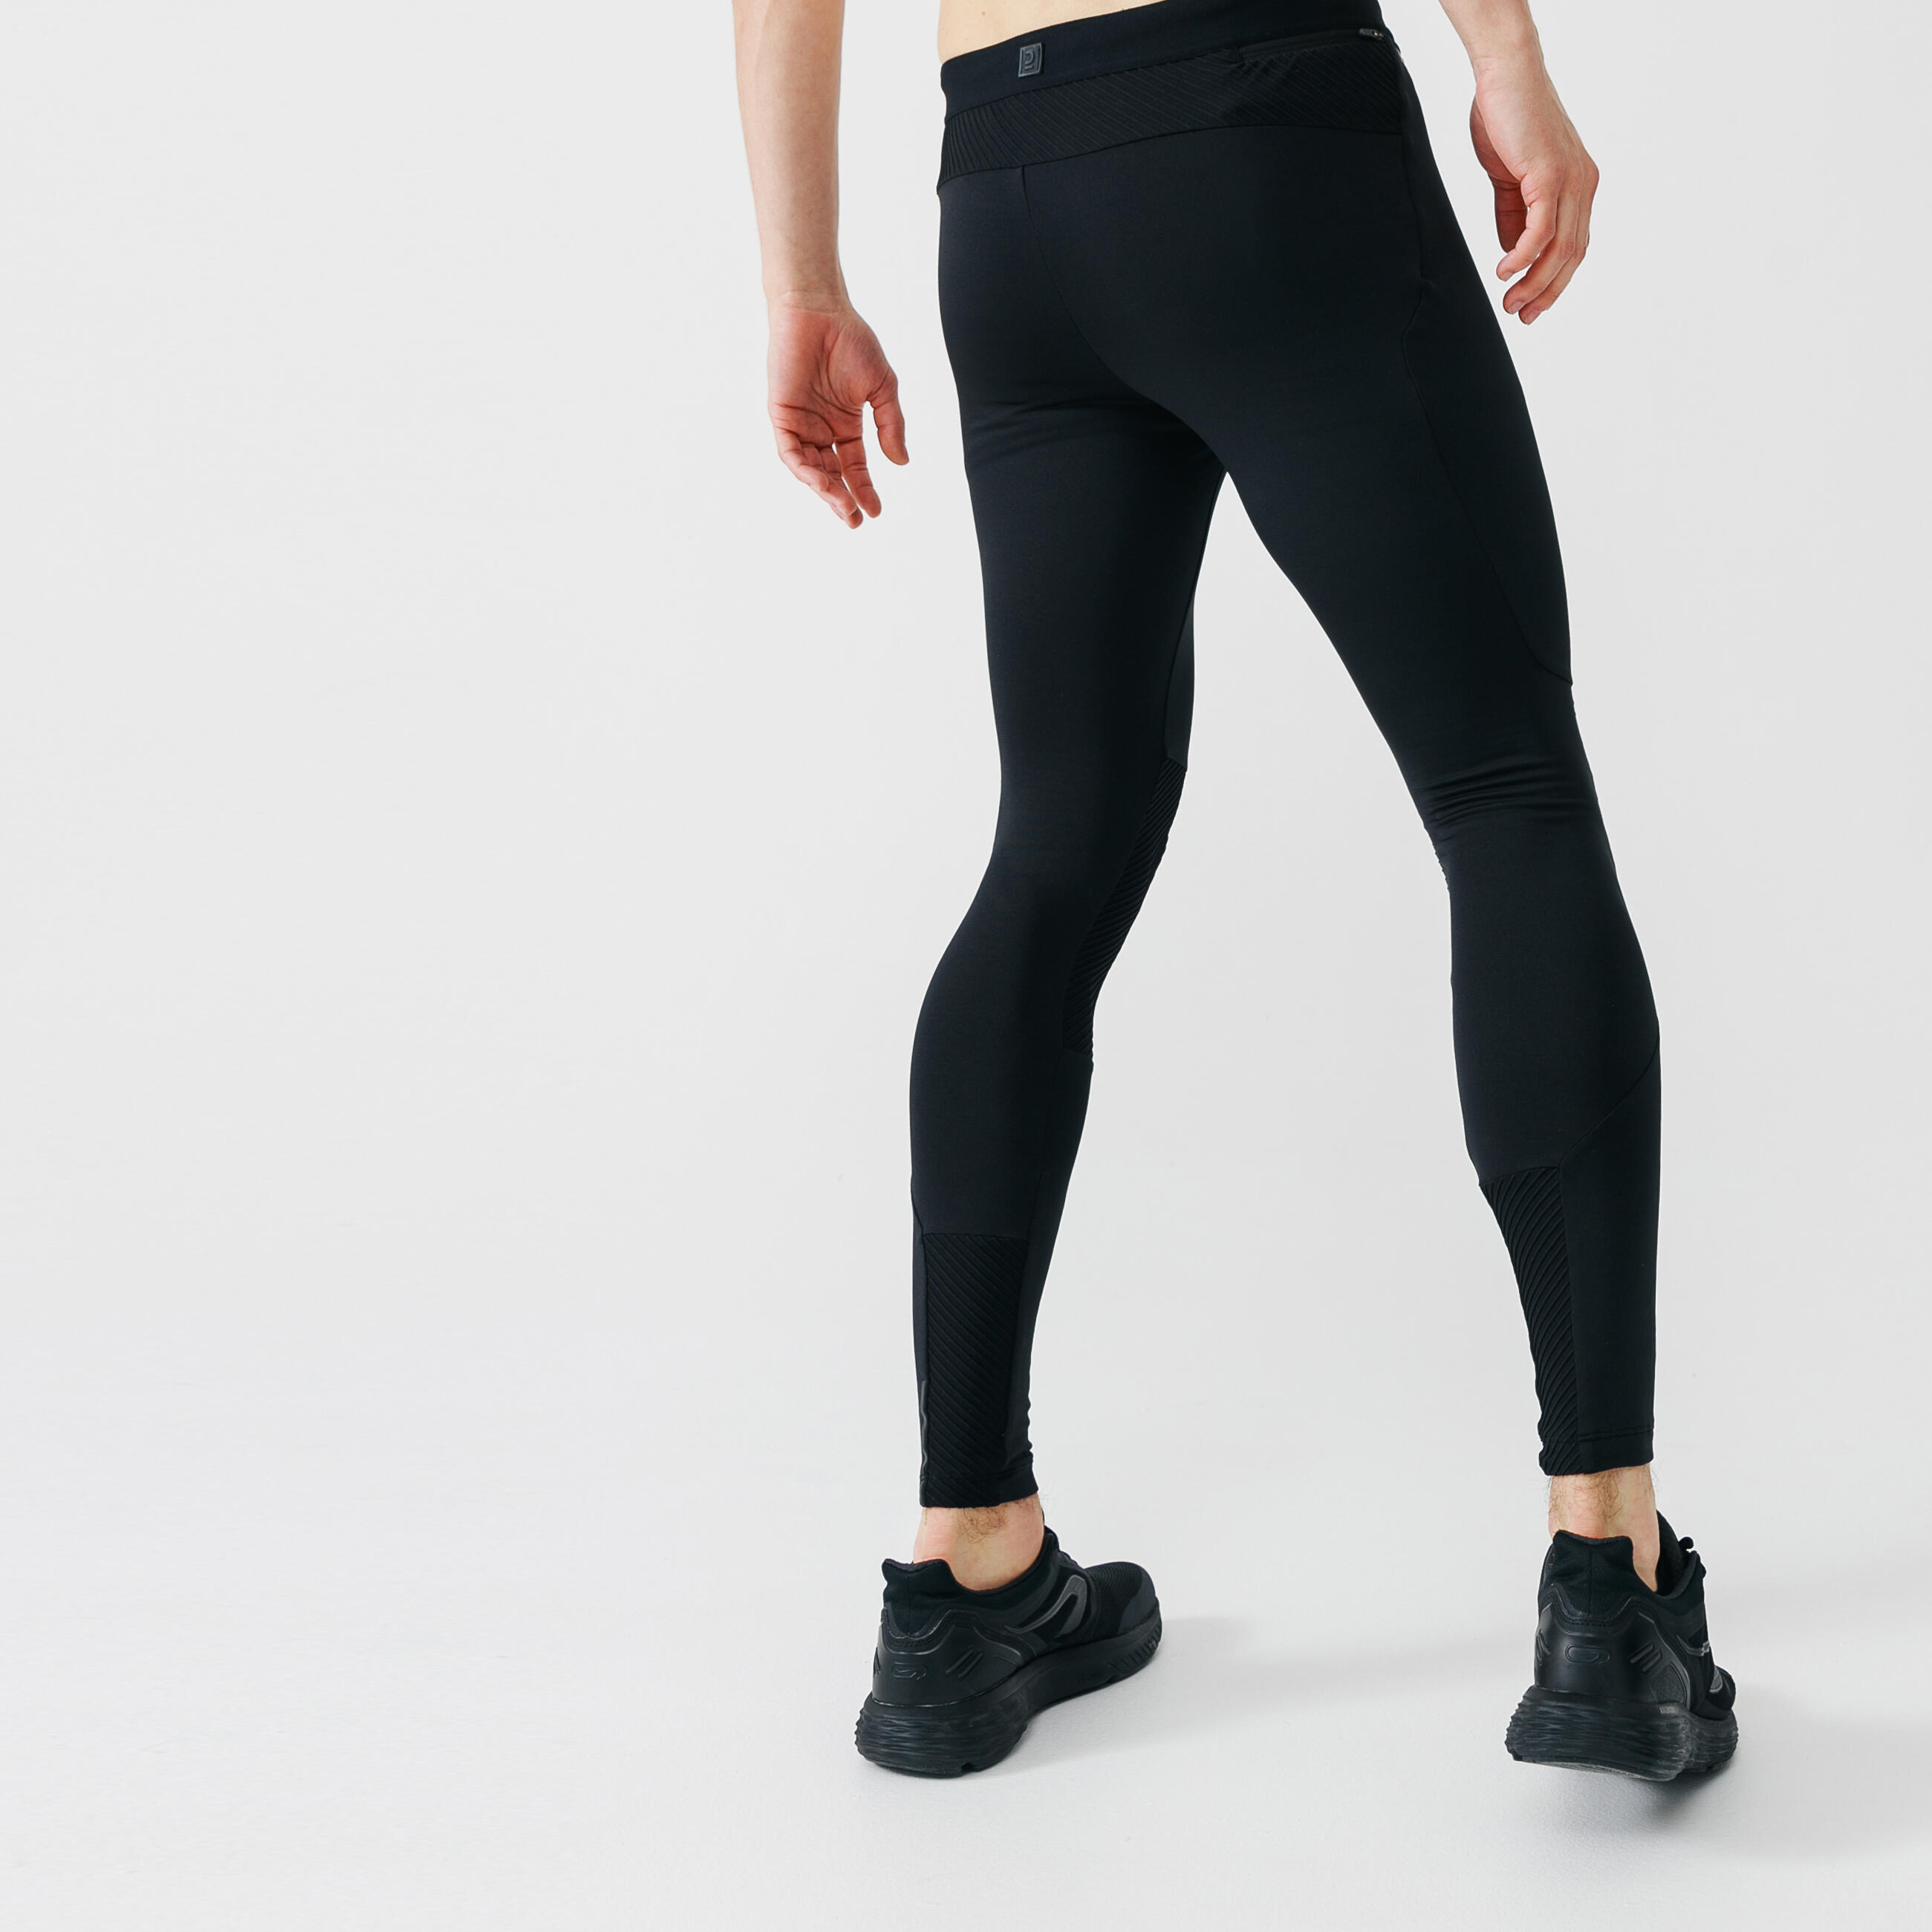 The Essential Run Warm Tights for - Decathlon South Africa